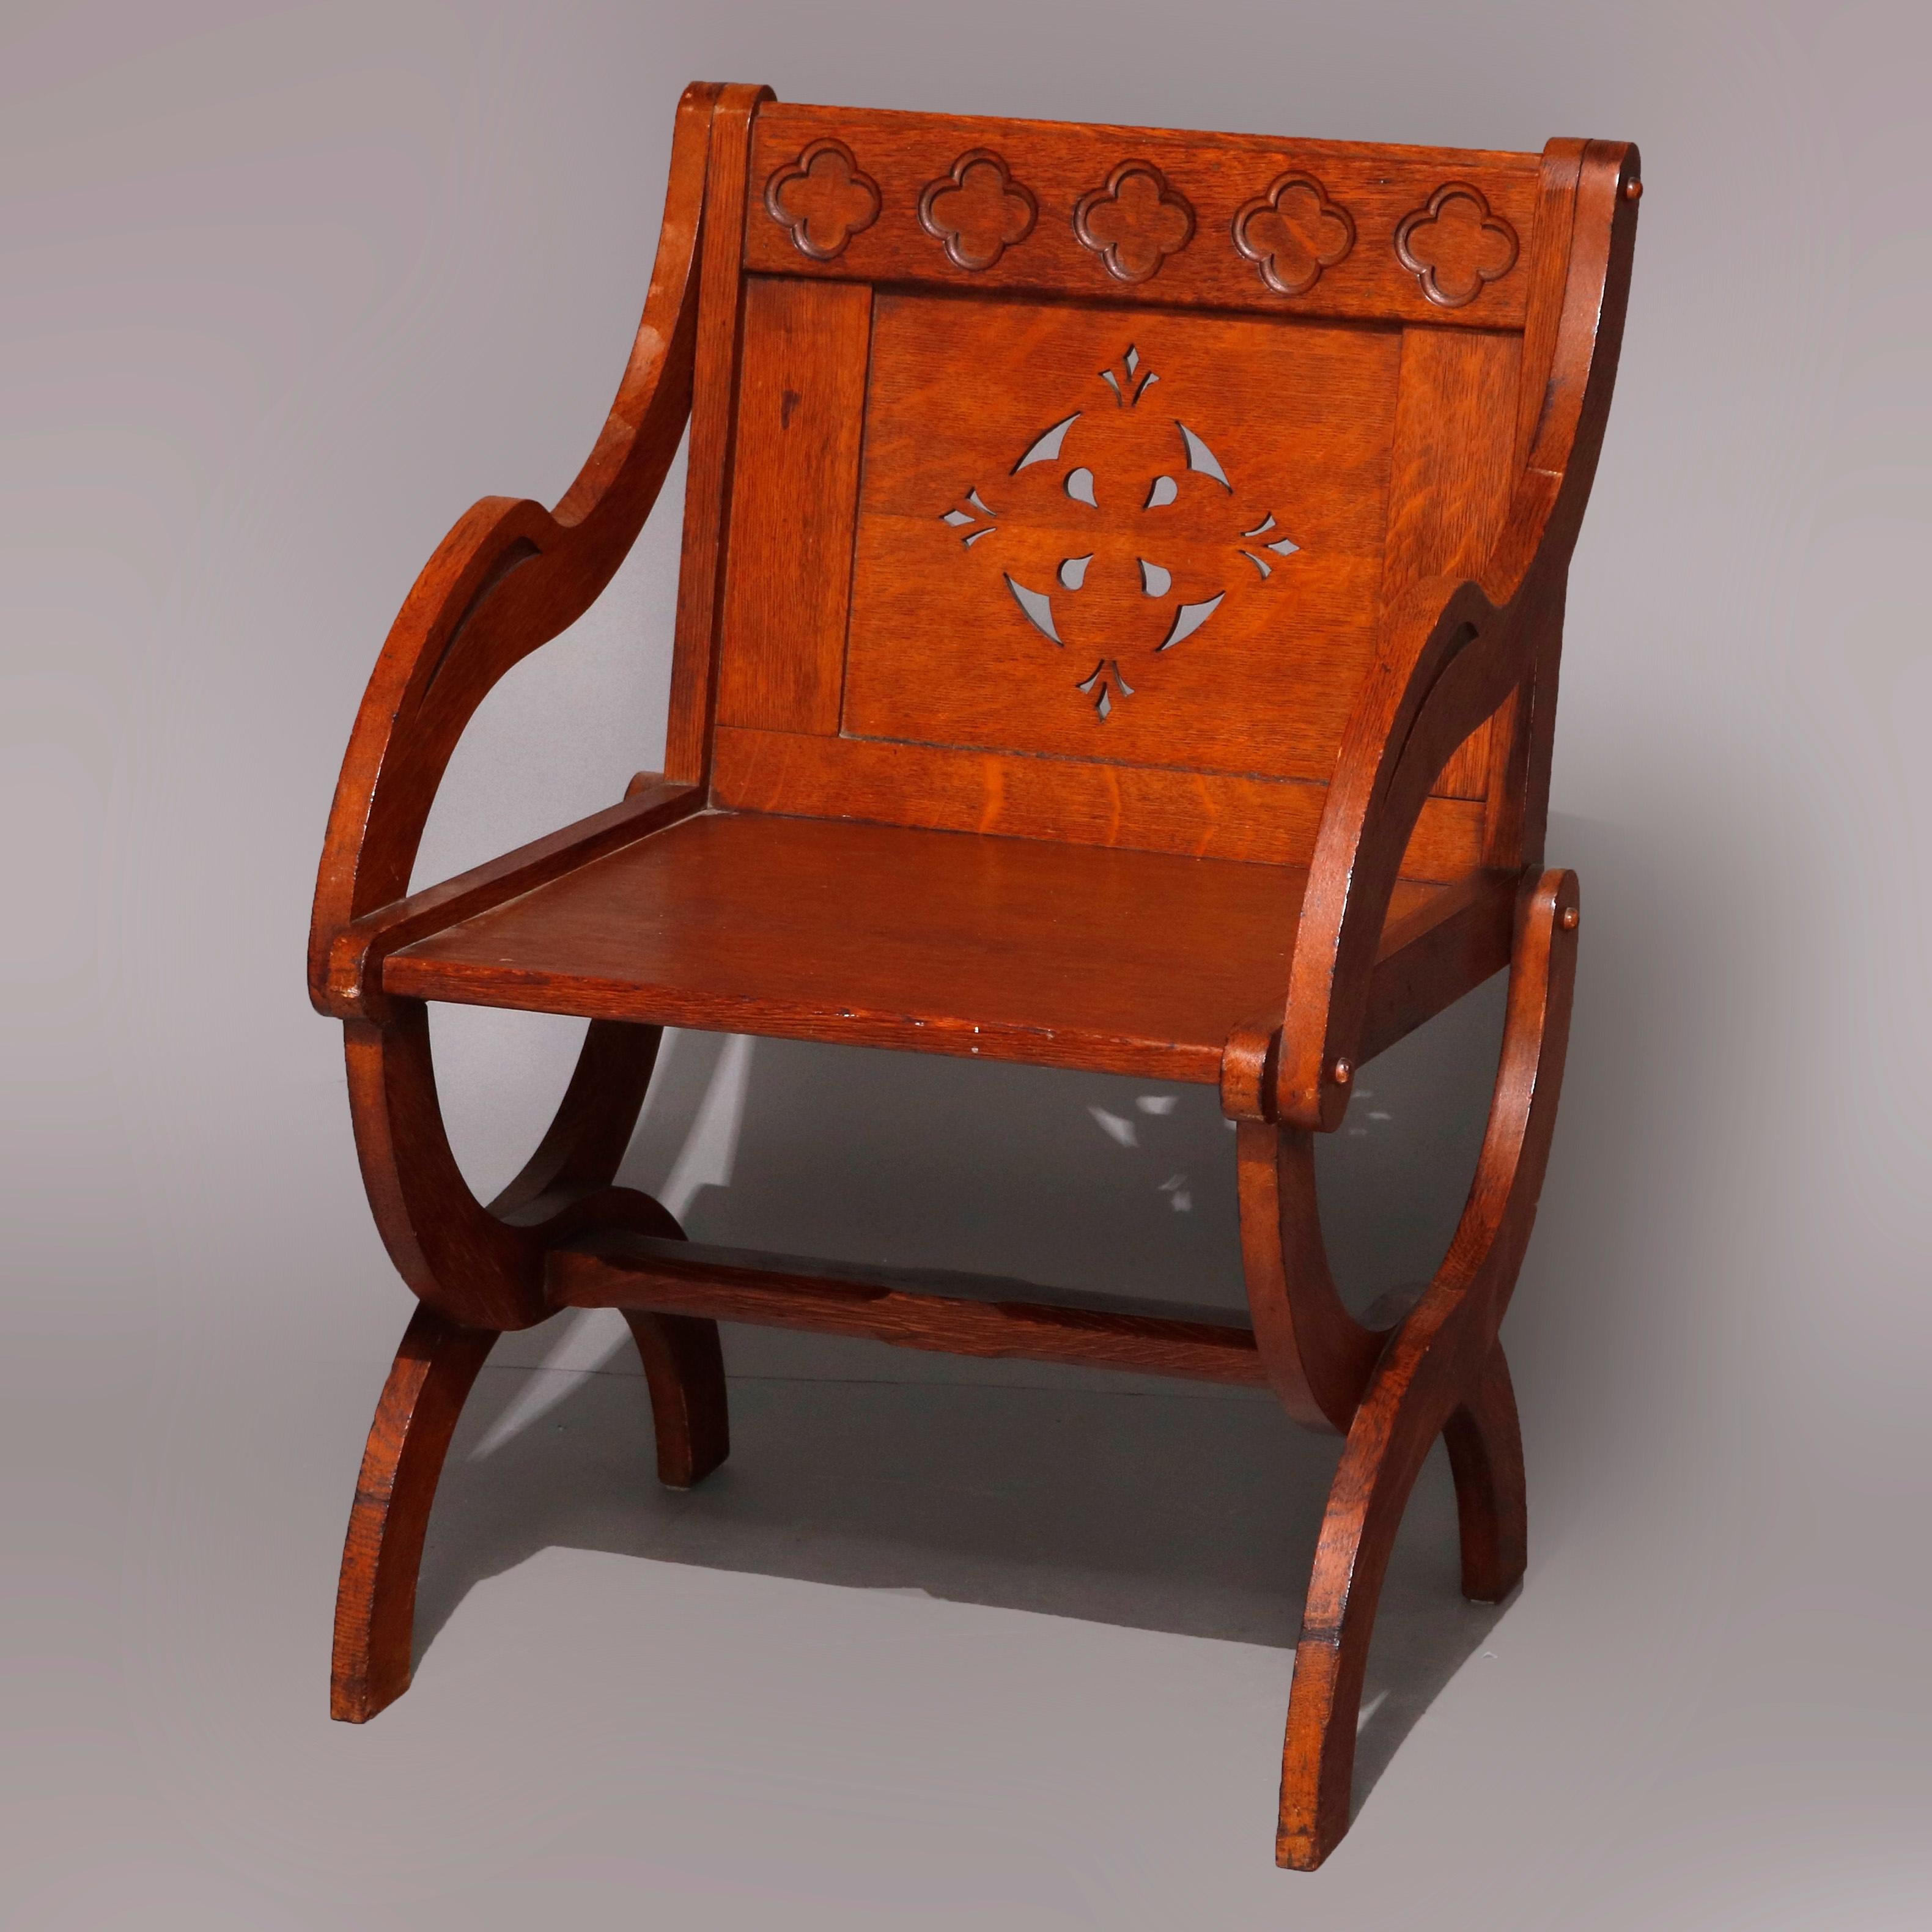 A set of six Gothic armchairs offers oak construction in stylized curule form with backs having carved stylized clovers in crest over pierced backs, curved arms and raised on X-form legs, circa 1900

***DELIVERY NOTICE – Due to COVID-19 we are